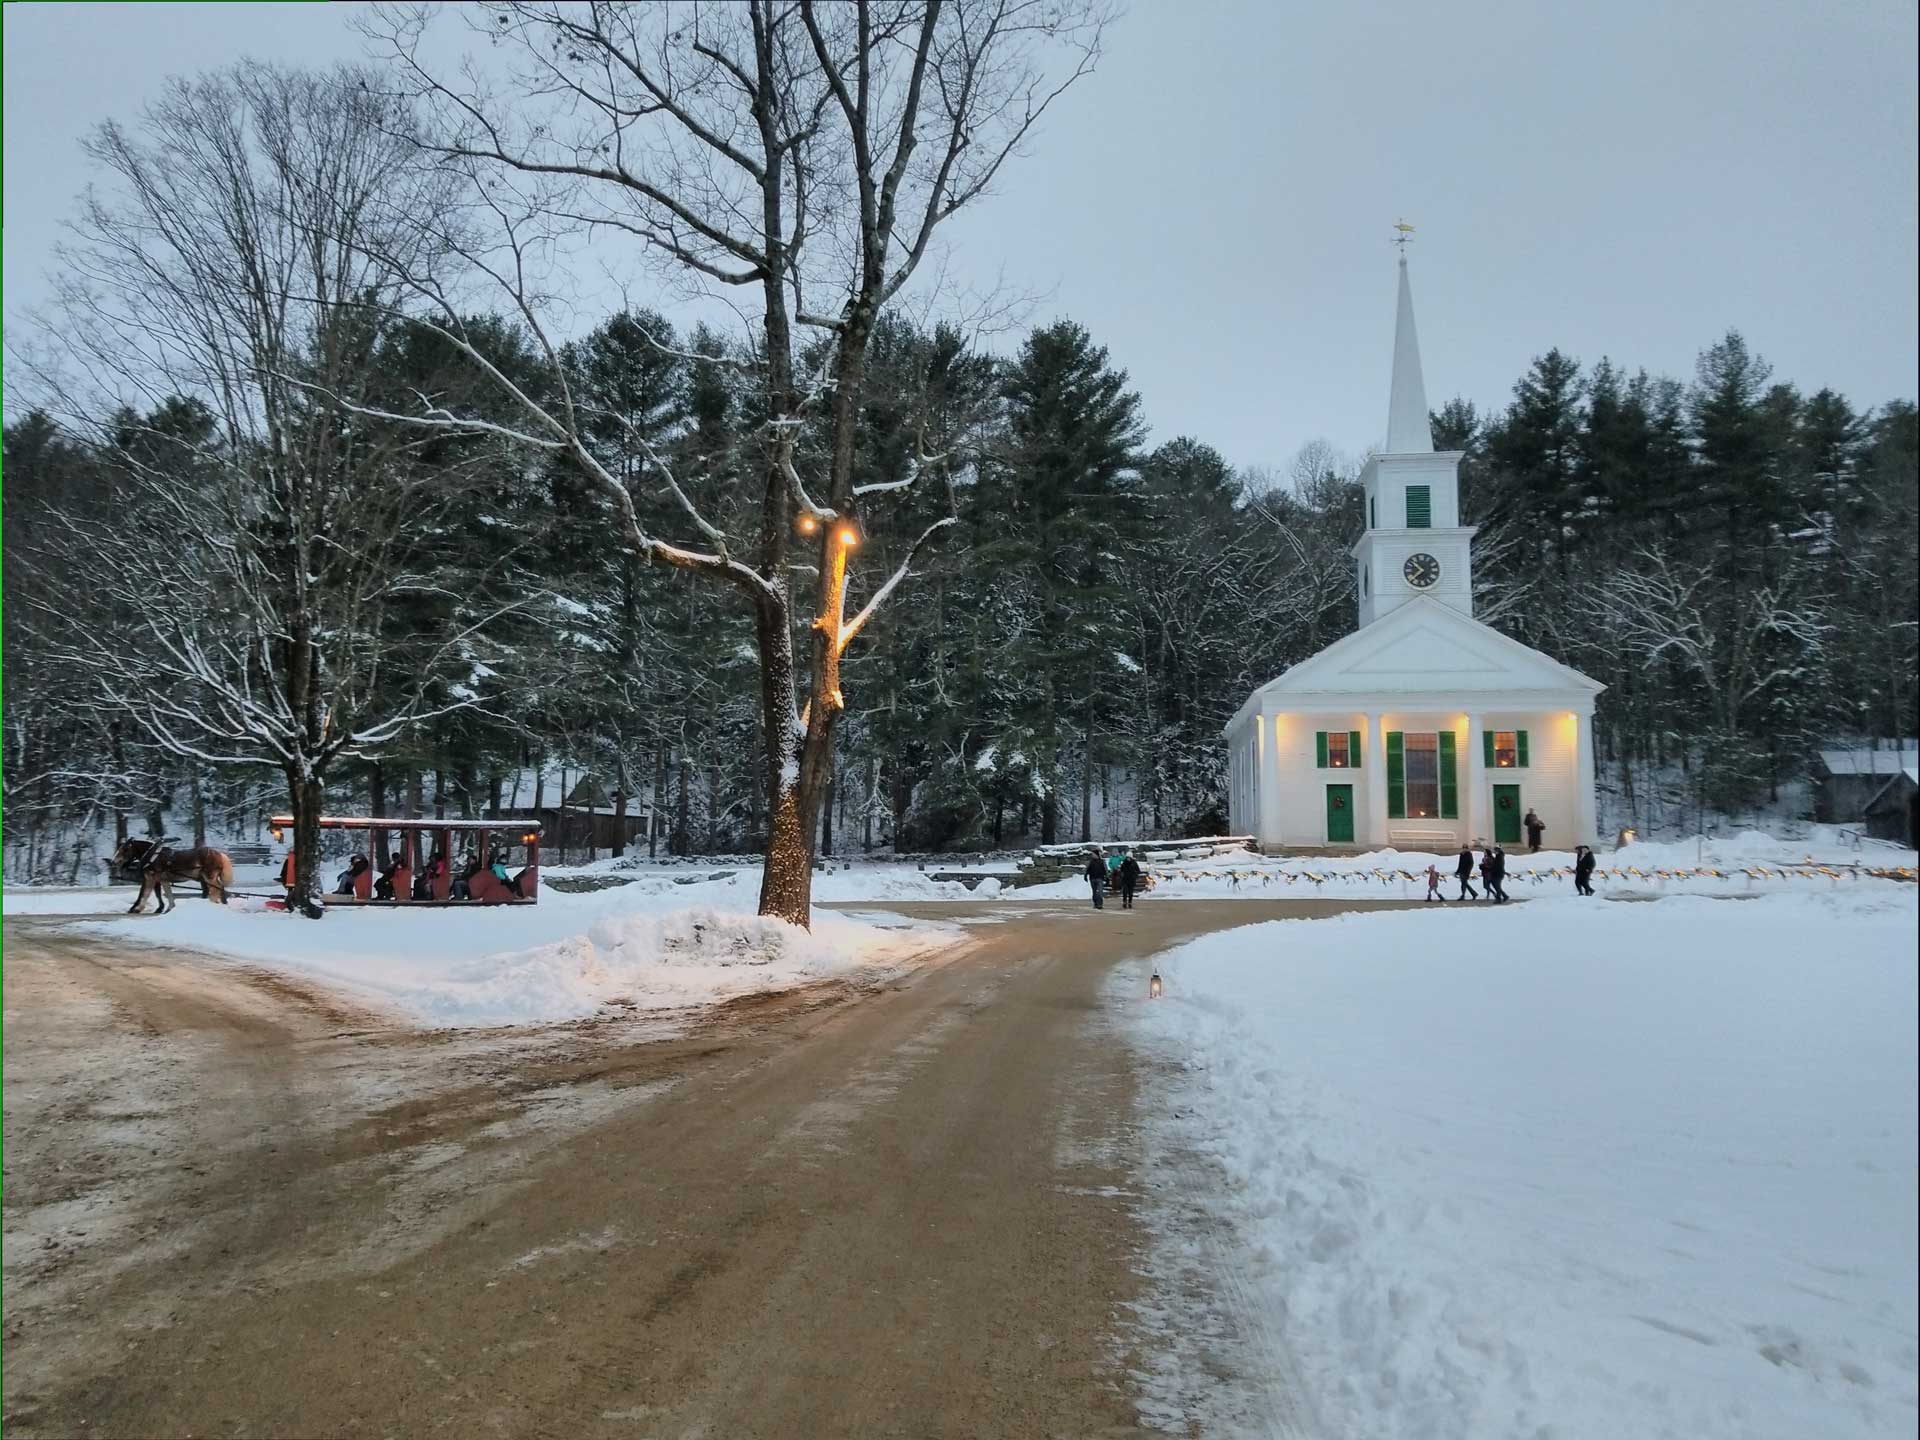 "View of the Center Meetinghouse in Old Sturbridge Village during winter."